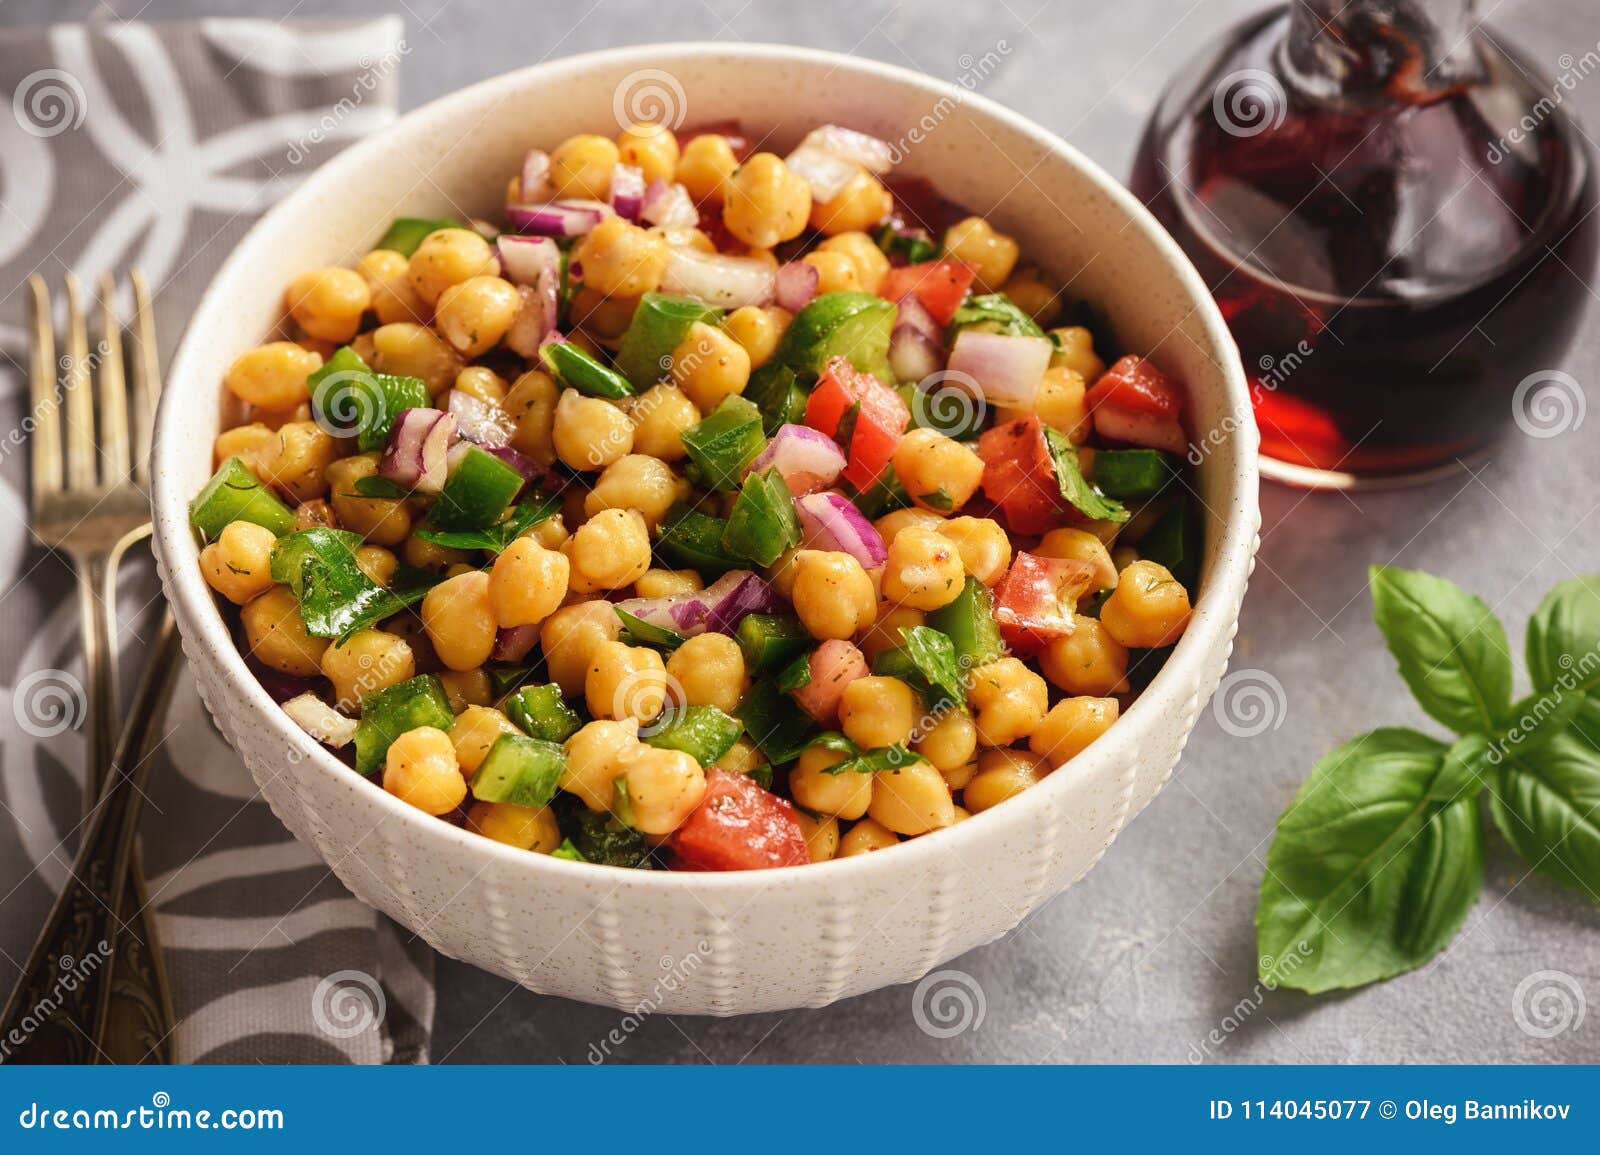 chickpea salad with green pepper, red onion and vinaigrette dressing.